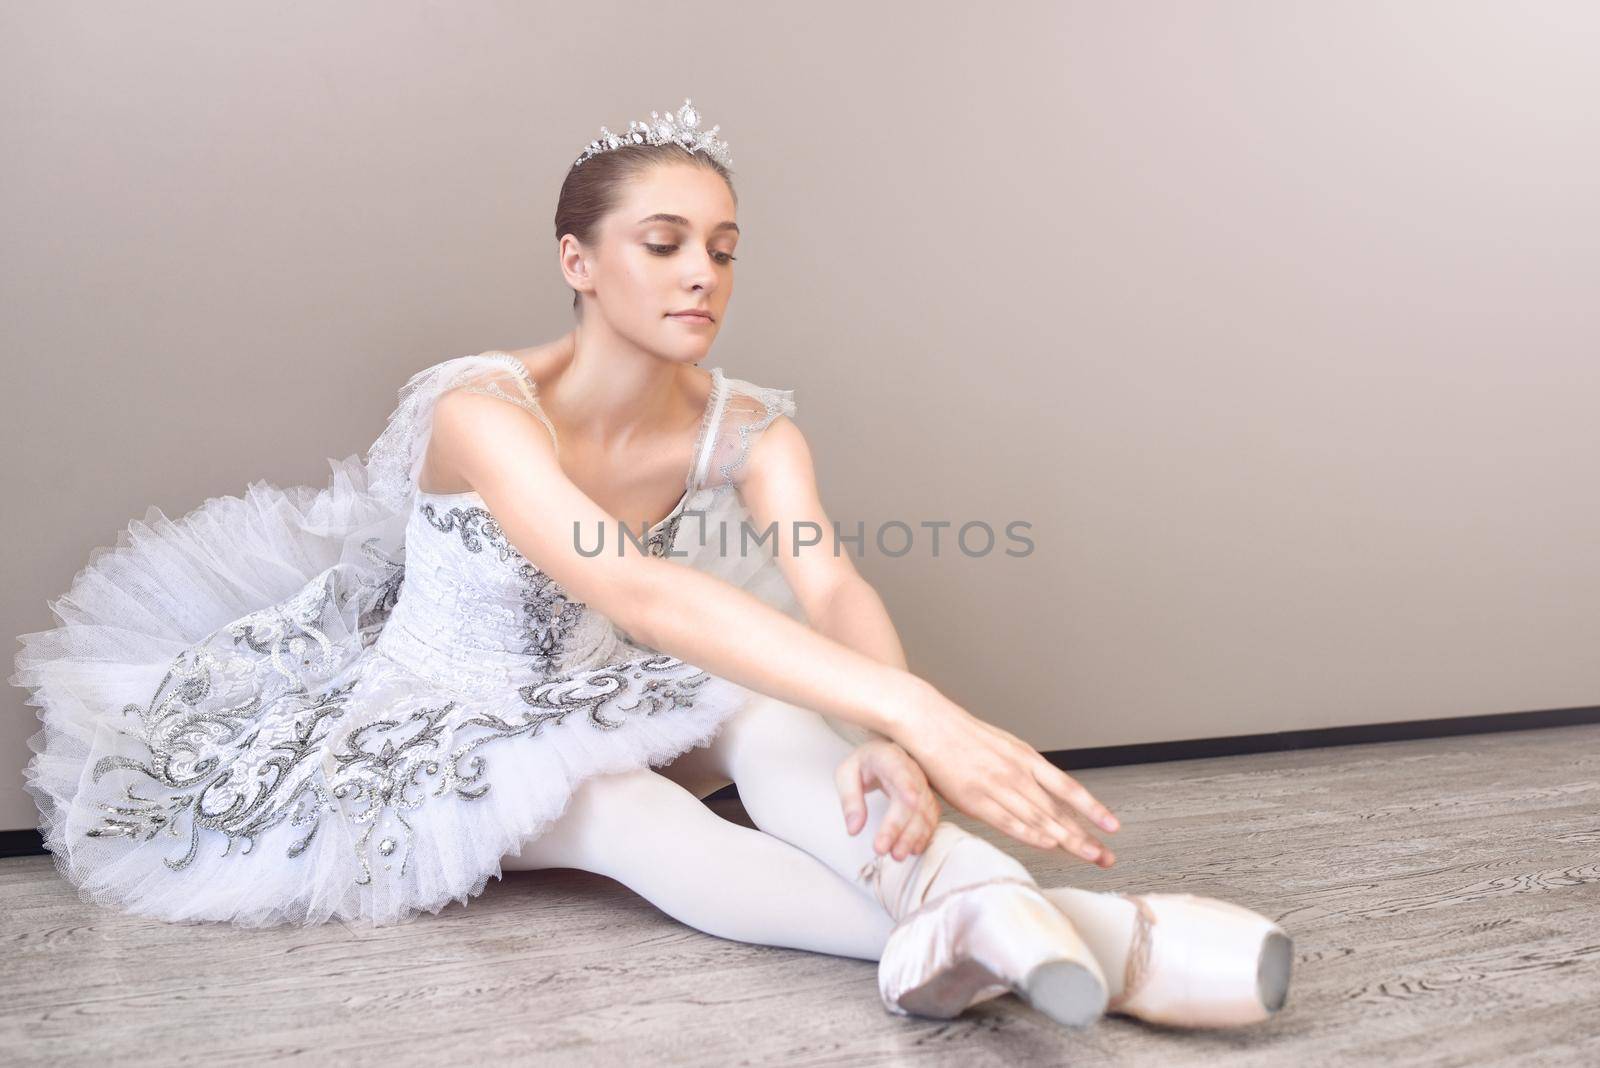 cute ballerina sitting on the floor with her arms outstretched forward, practicing ballet poses in the studio